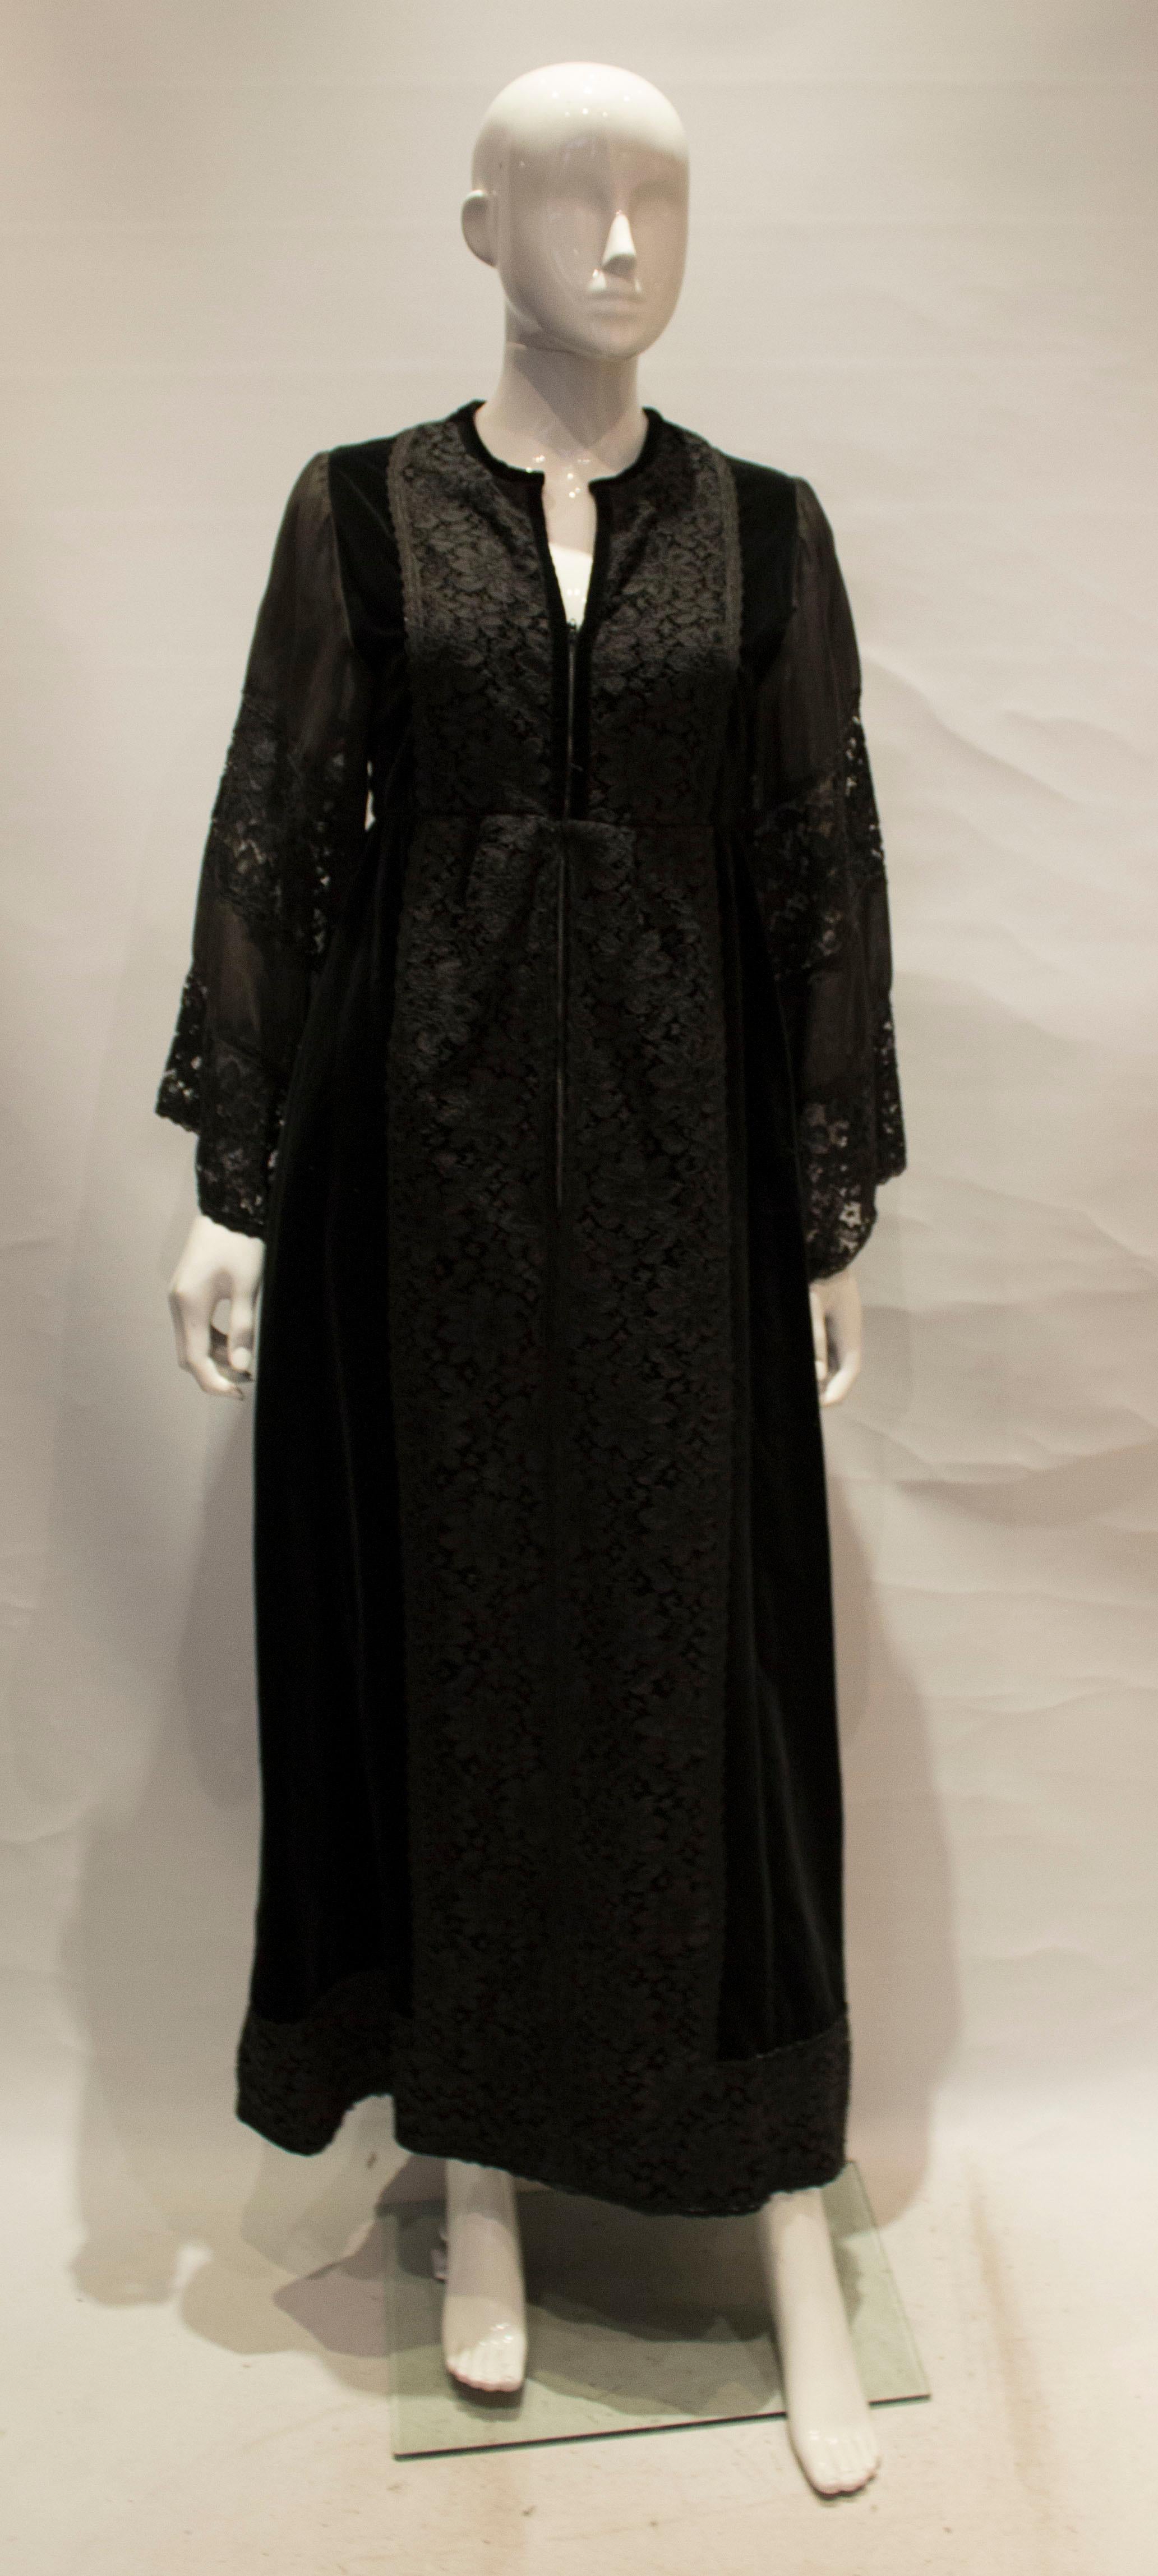 A great vintage gown for Fall by Angela Gore. The dress has a v neckline, with velvet and lace panels with a front zip opening and is fully lined.